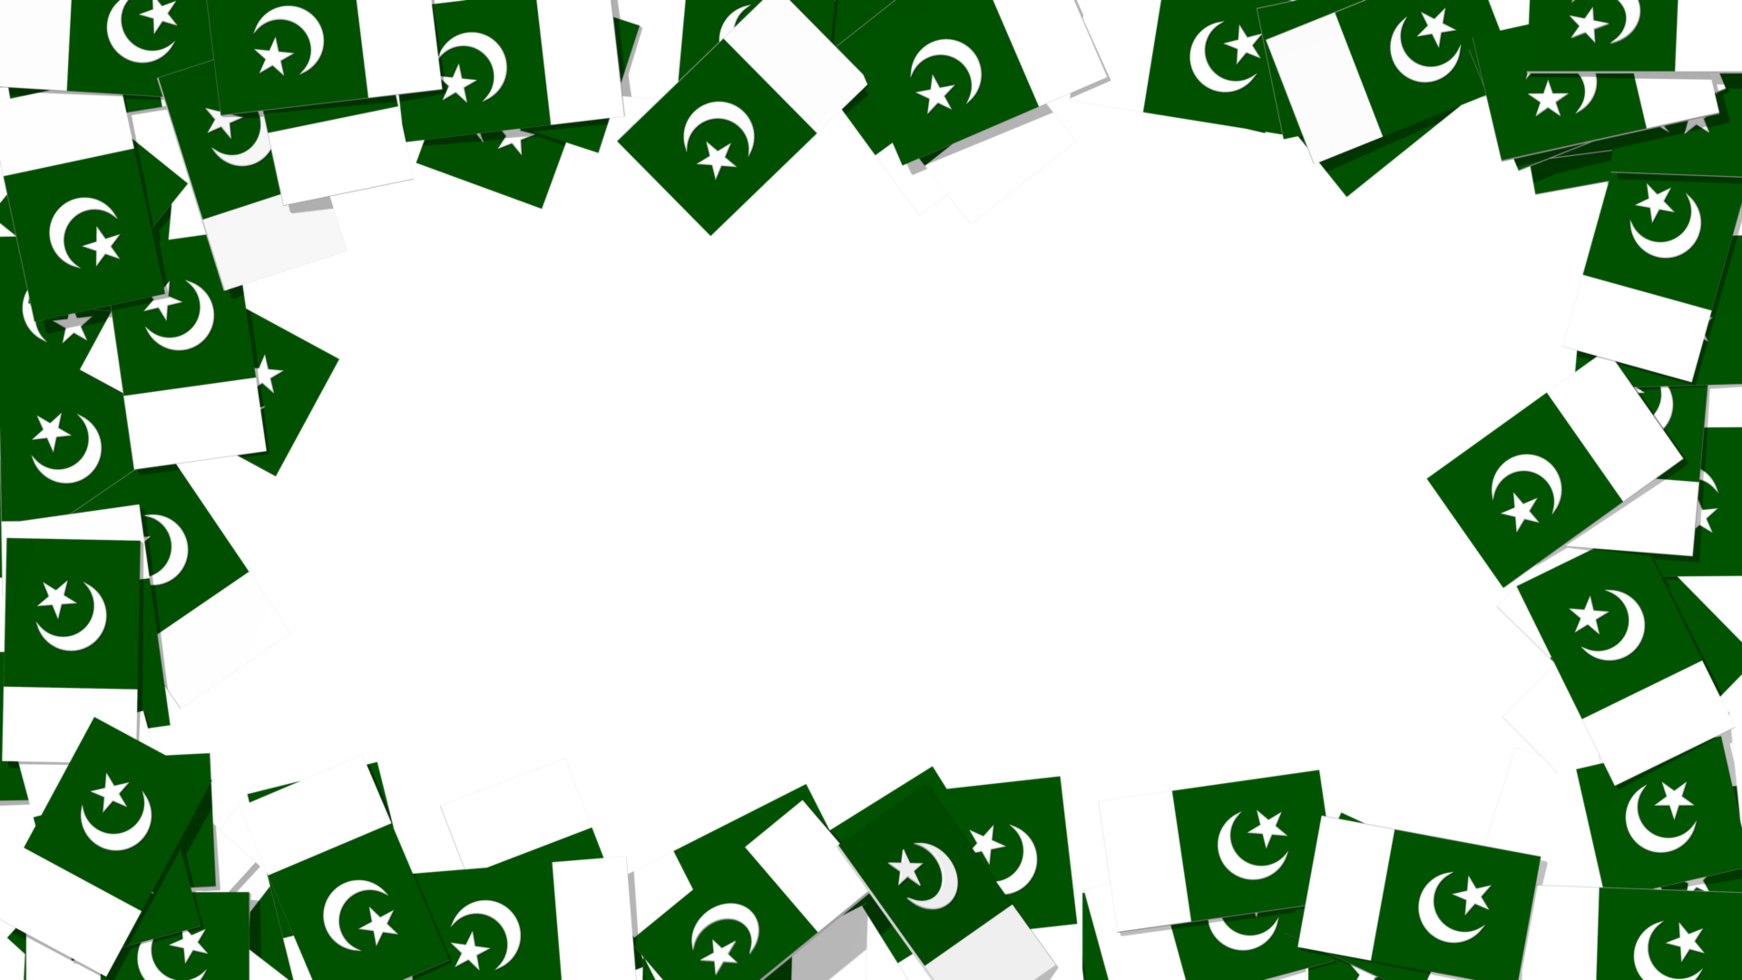 Pakistan Flags Falling From Sides, National Day, Independence Day, 3D Rendering png